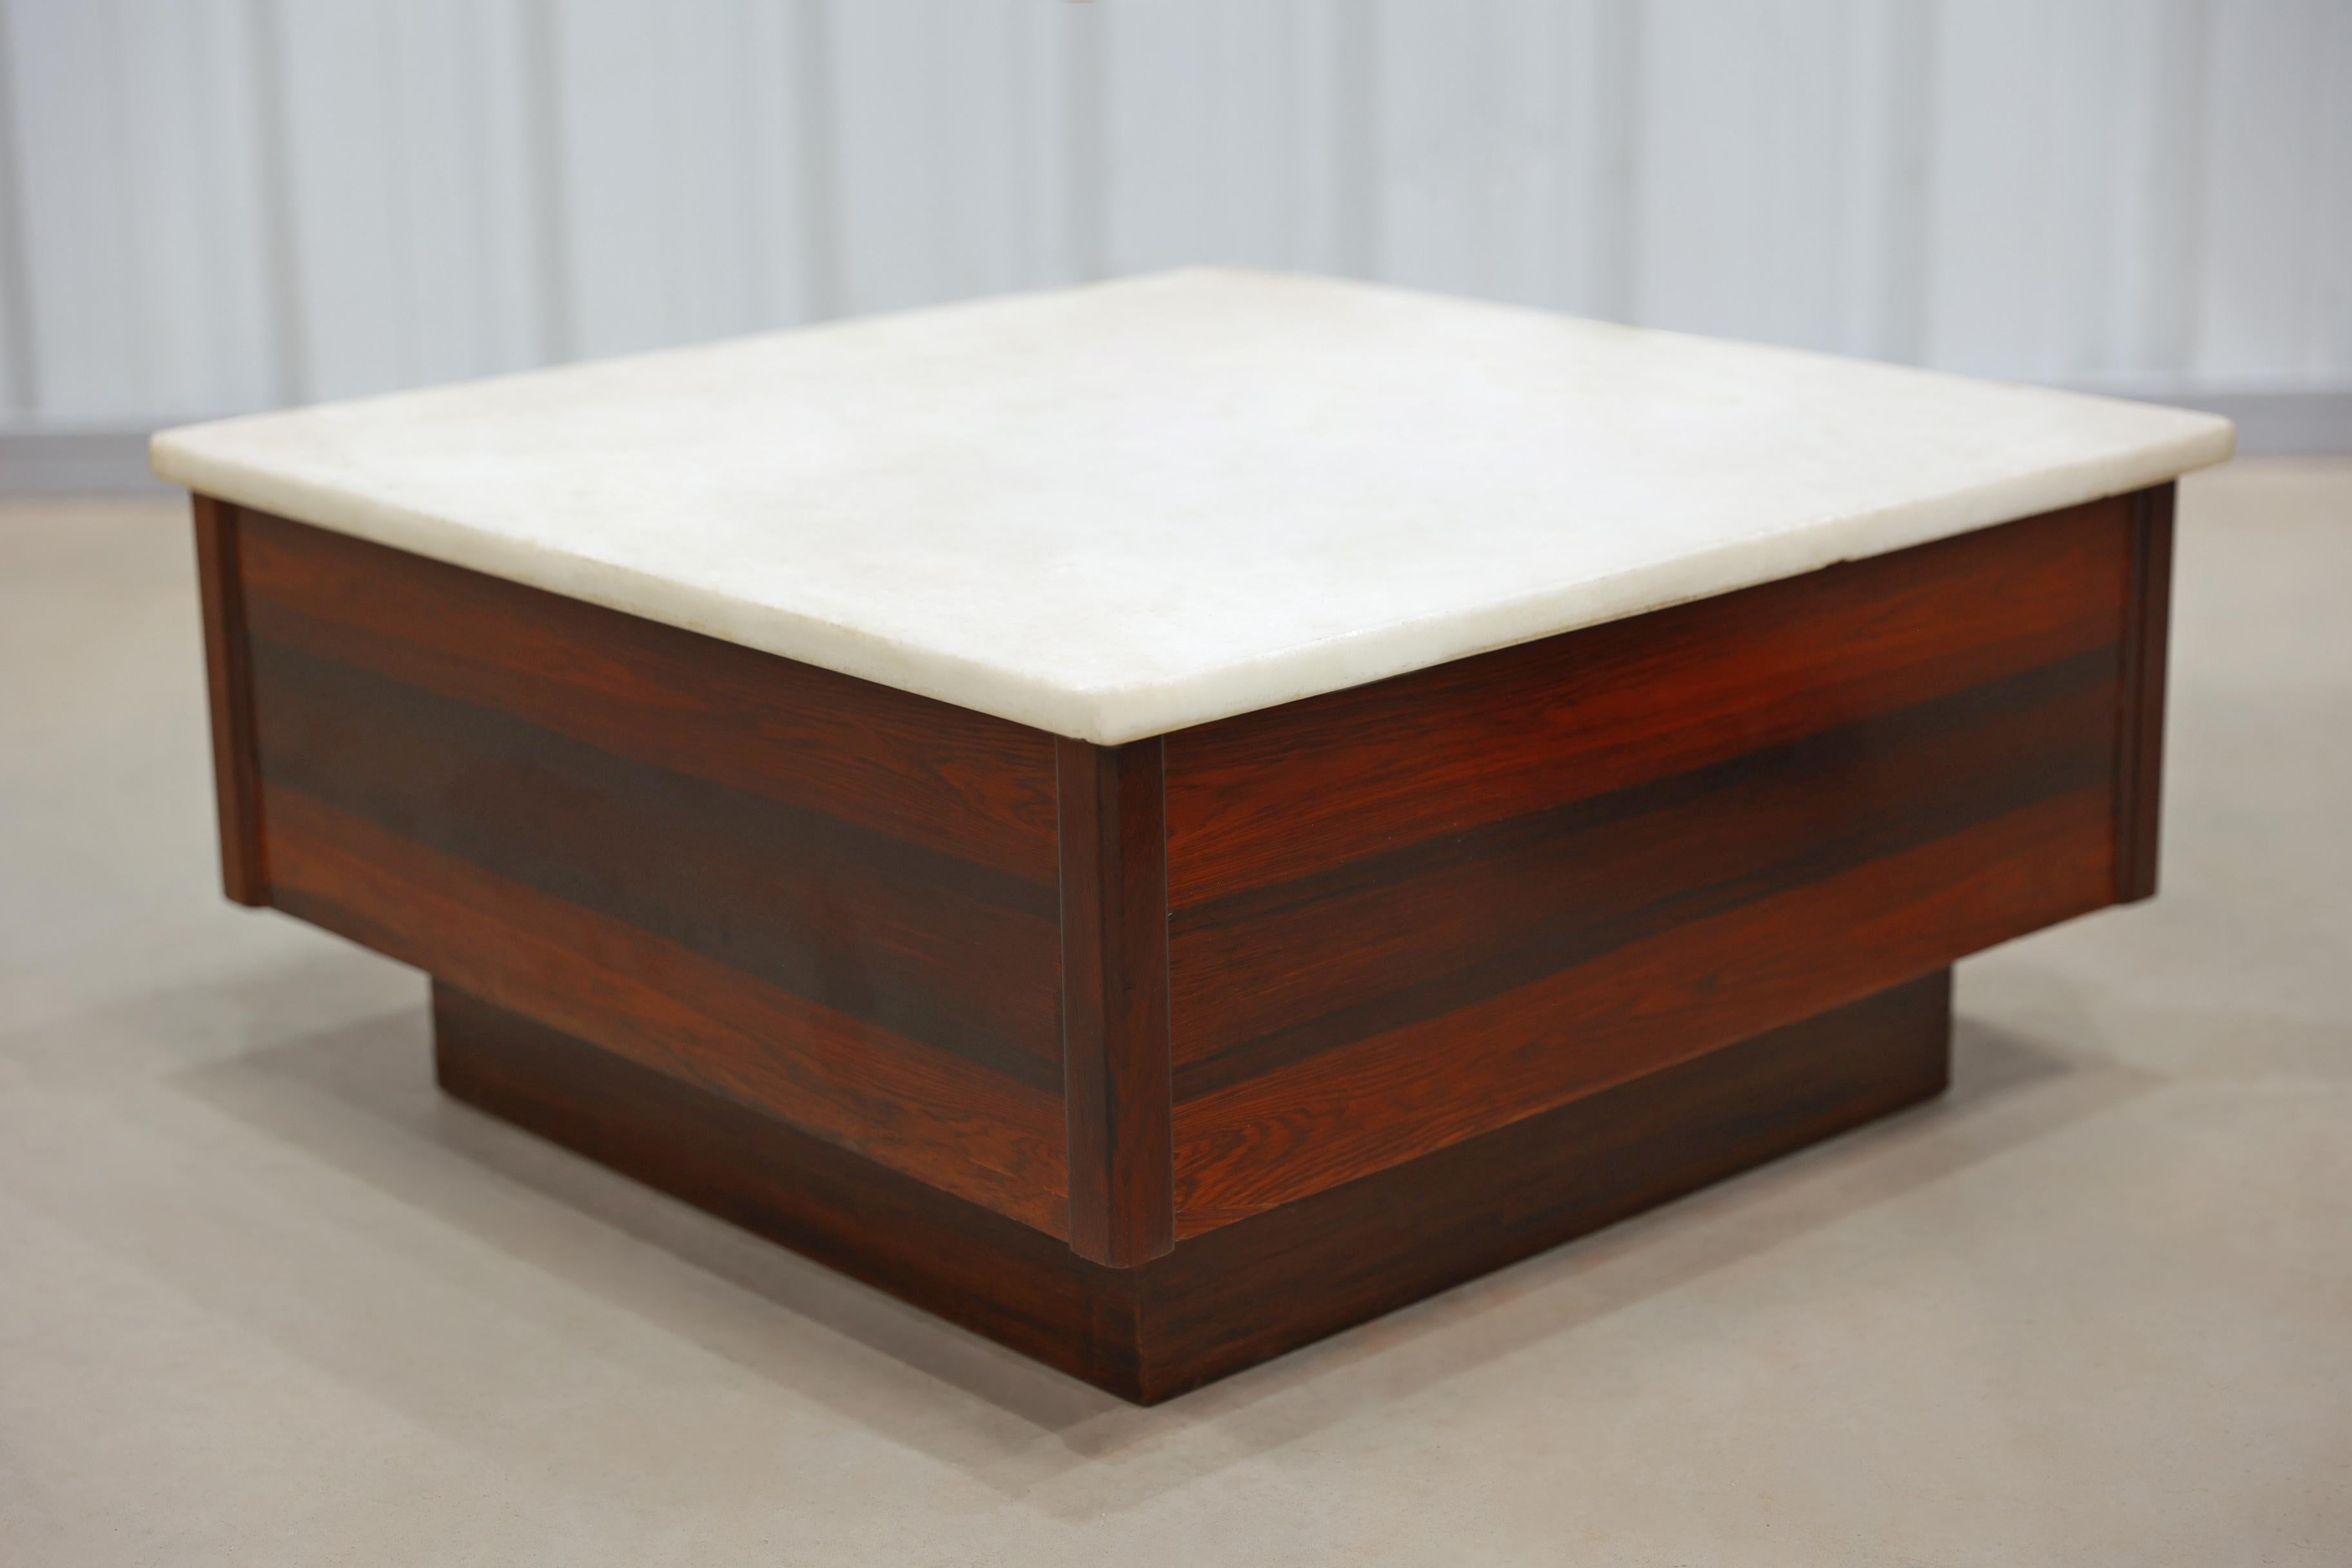 Brazilian Modern Coffee Table in Hardwood & Marble Top, Unknown, c. 1960 For Sale 1